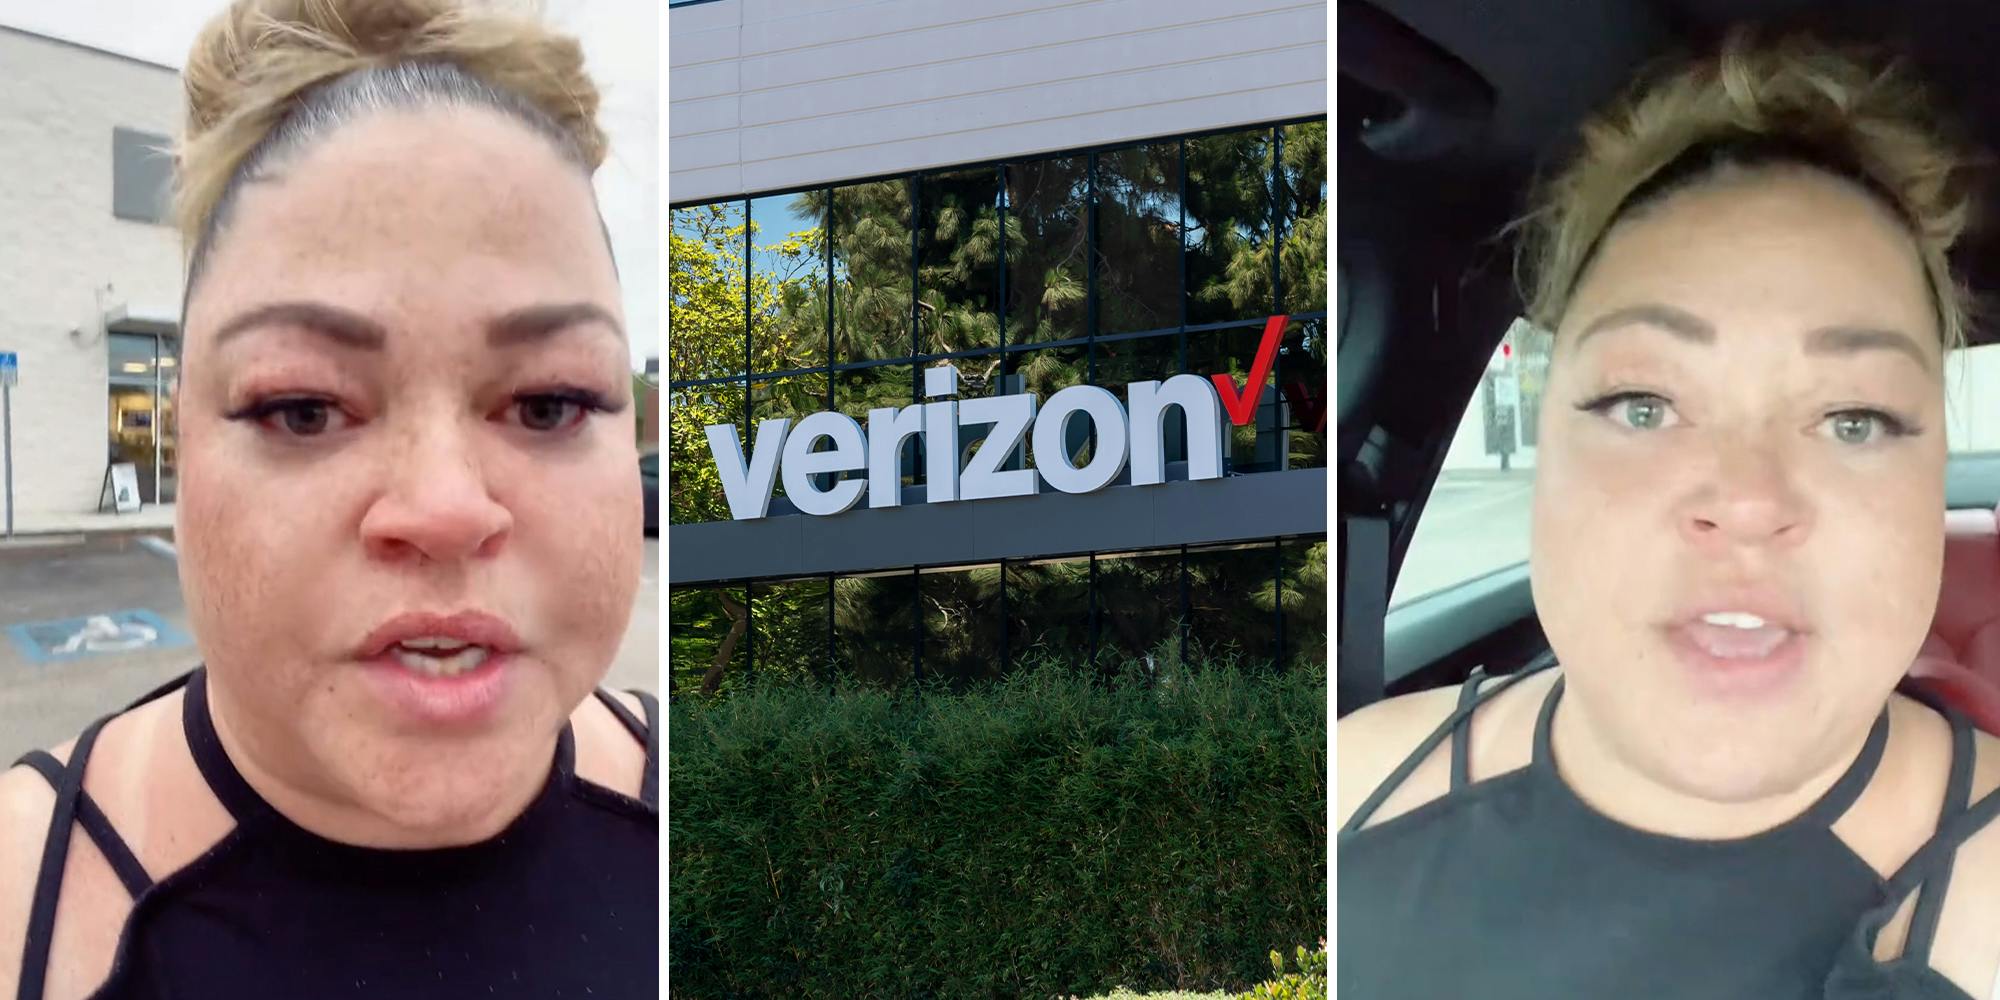 ‘My account was overdrawn. I couldn’t pay my bills’: Woman says Verizon charged her $10K. She was only a customer for 1 week